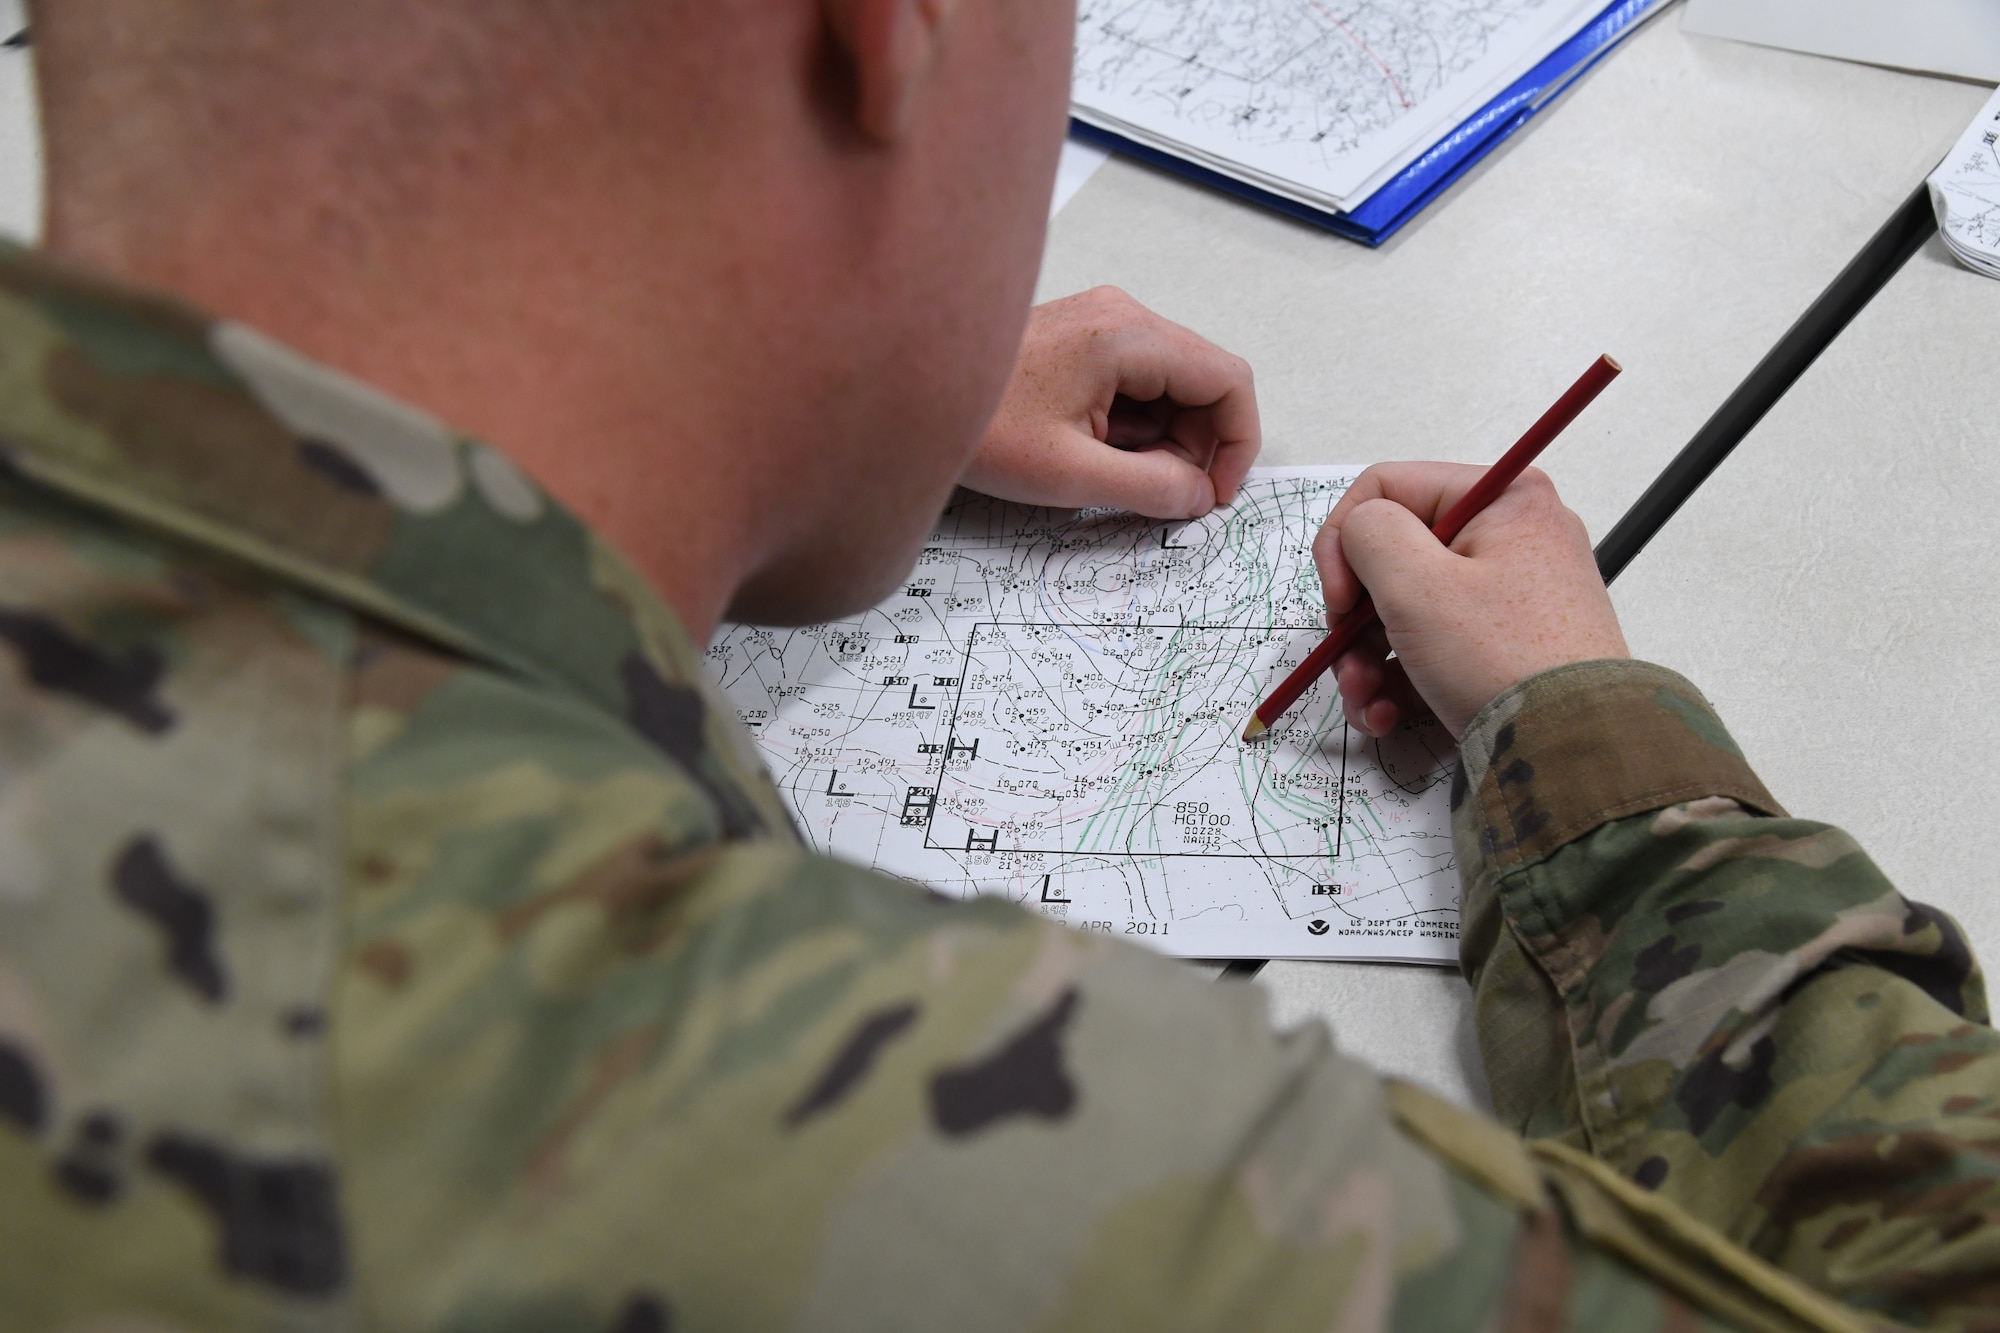 U.S. Air Force Airman 1st Class Christopher Scott, 335th Training Squadron student, plots a weather chart during the weather initial skills course inside of the Joint Weather Training Facility at Keesler Air Force Base, Mississippi, July 21, 2022. The weather apprentice course, which graduated 650 students this past year, takes 151 academic days to complete. Approximately 7,400 students go through the 335th TRS's 13 Air Force Specialty Codes each year. (U.S. Air Force photo by Kemberly Groue)